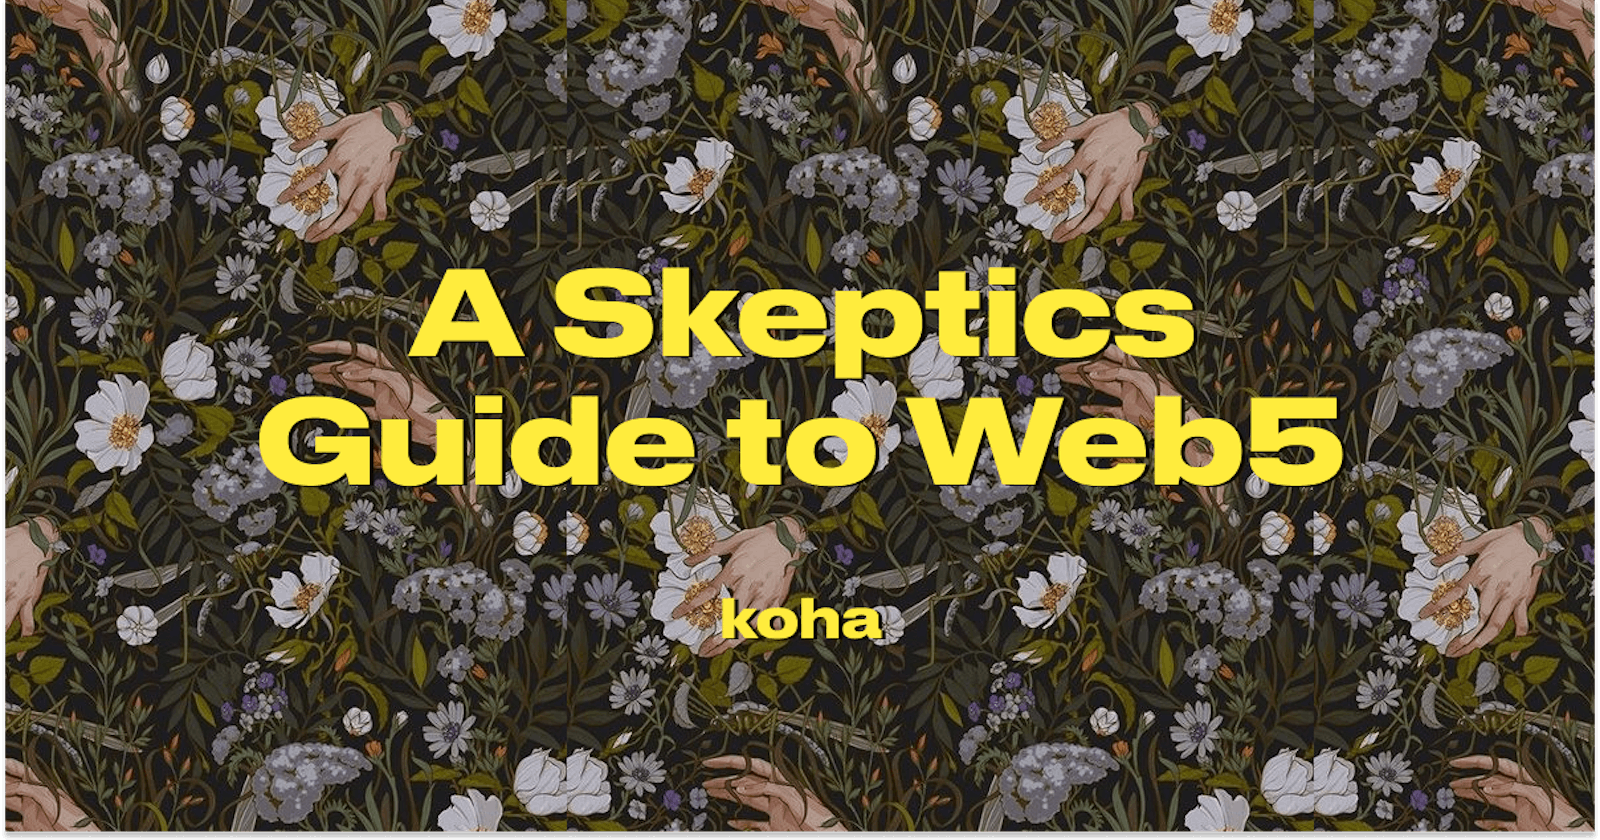 A Skeptics Guide to Web5